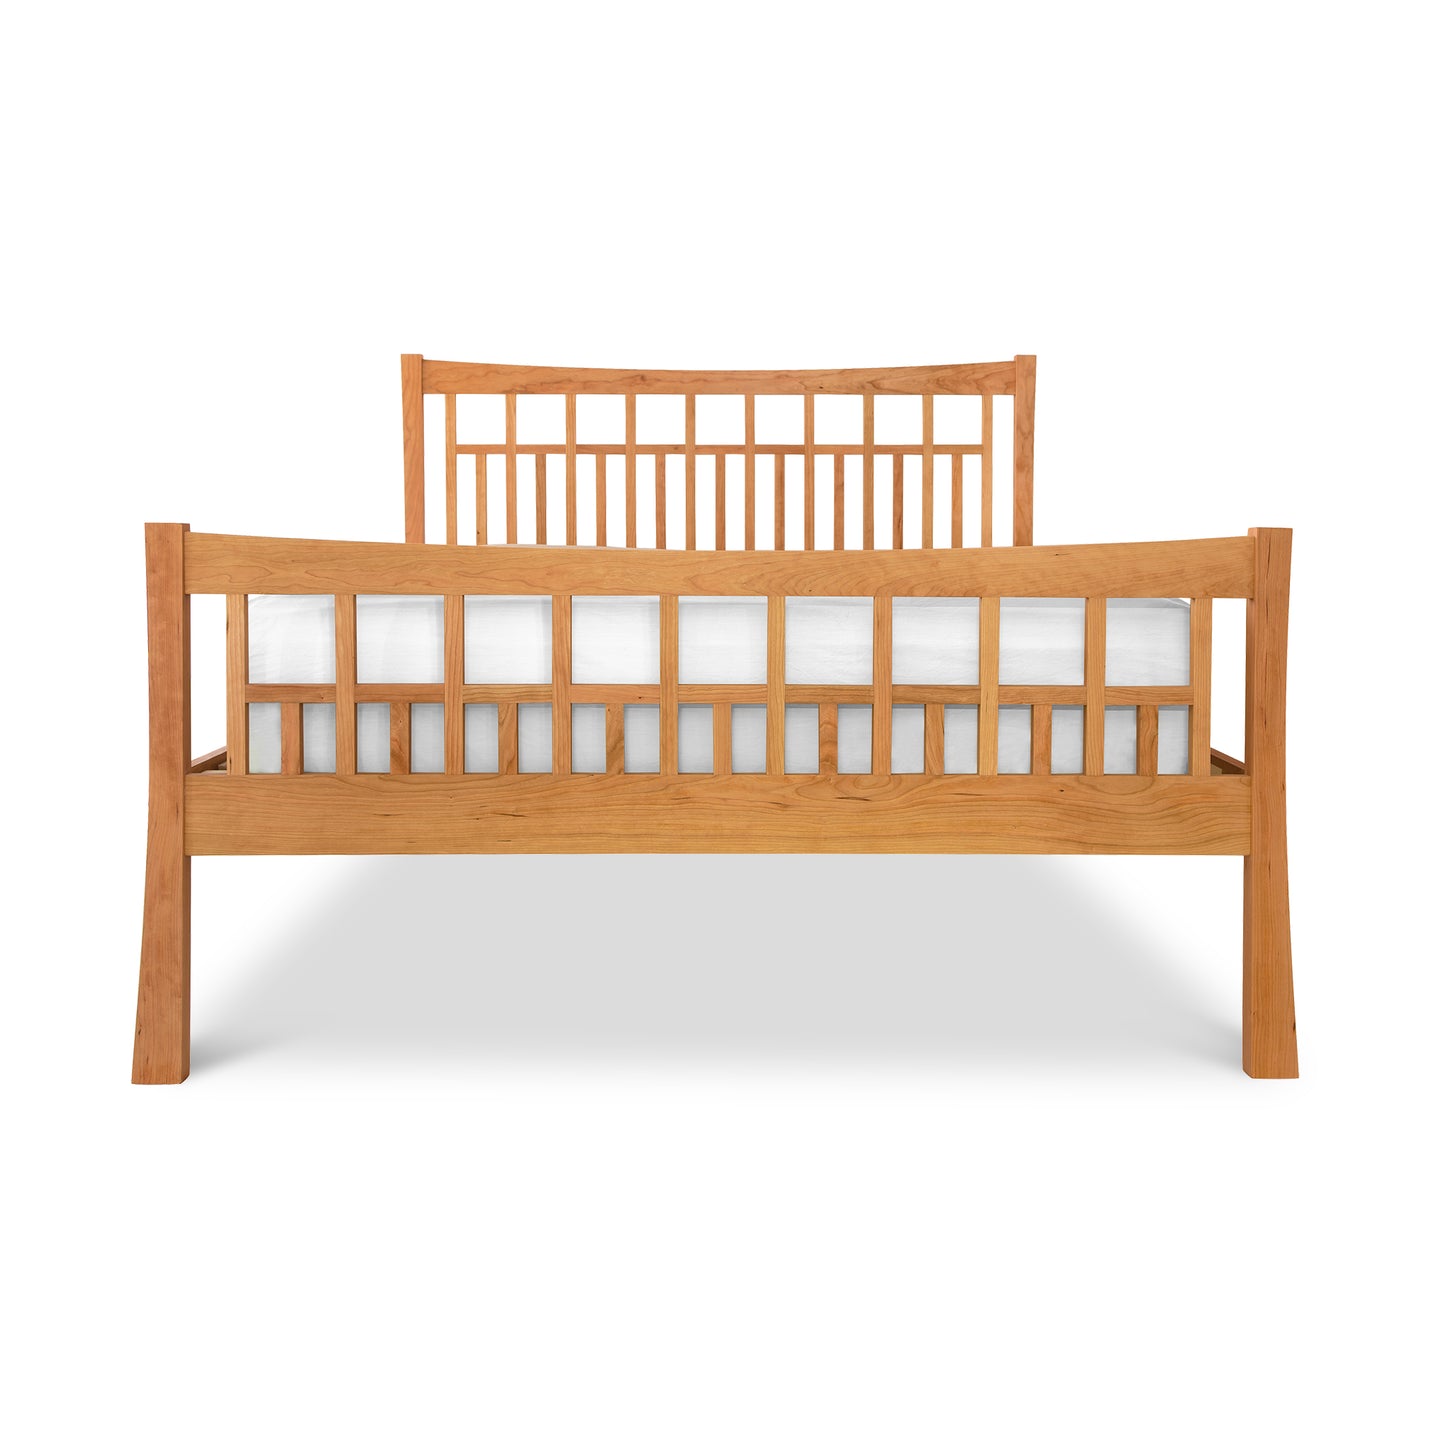 A Vermont Furniture Designs Contemporary Craftsman High Footboard Bed, solid wood bed frame with a slatted headboard and footboard, finished with eco-friendly oil, isolated on a white background.